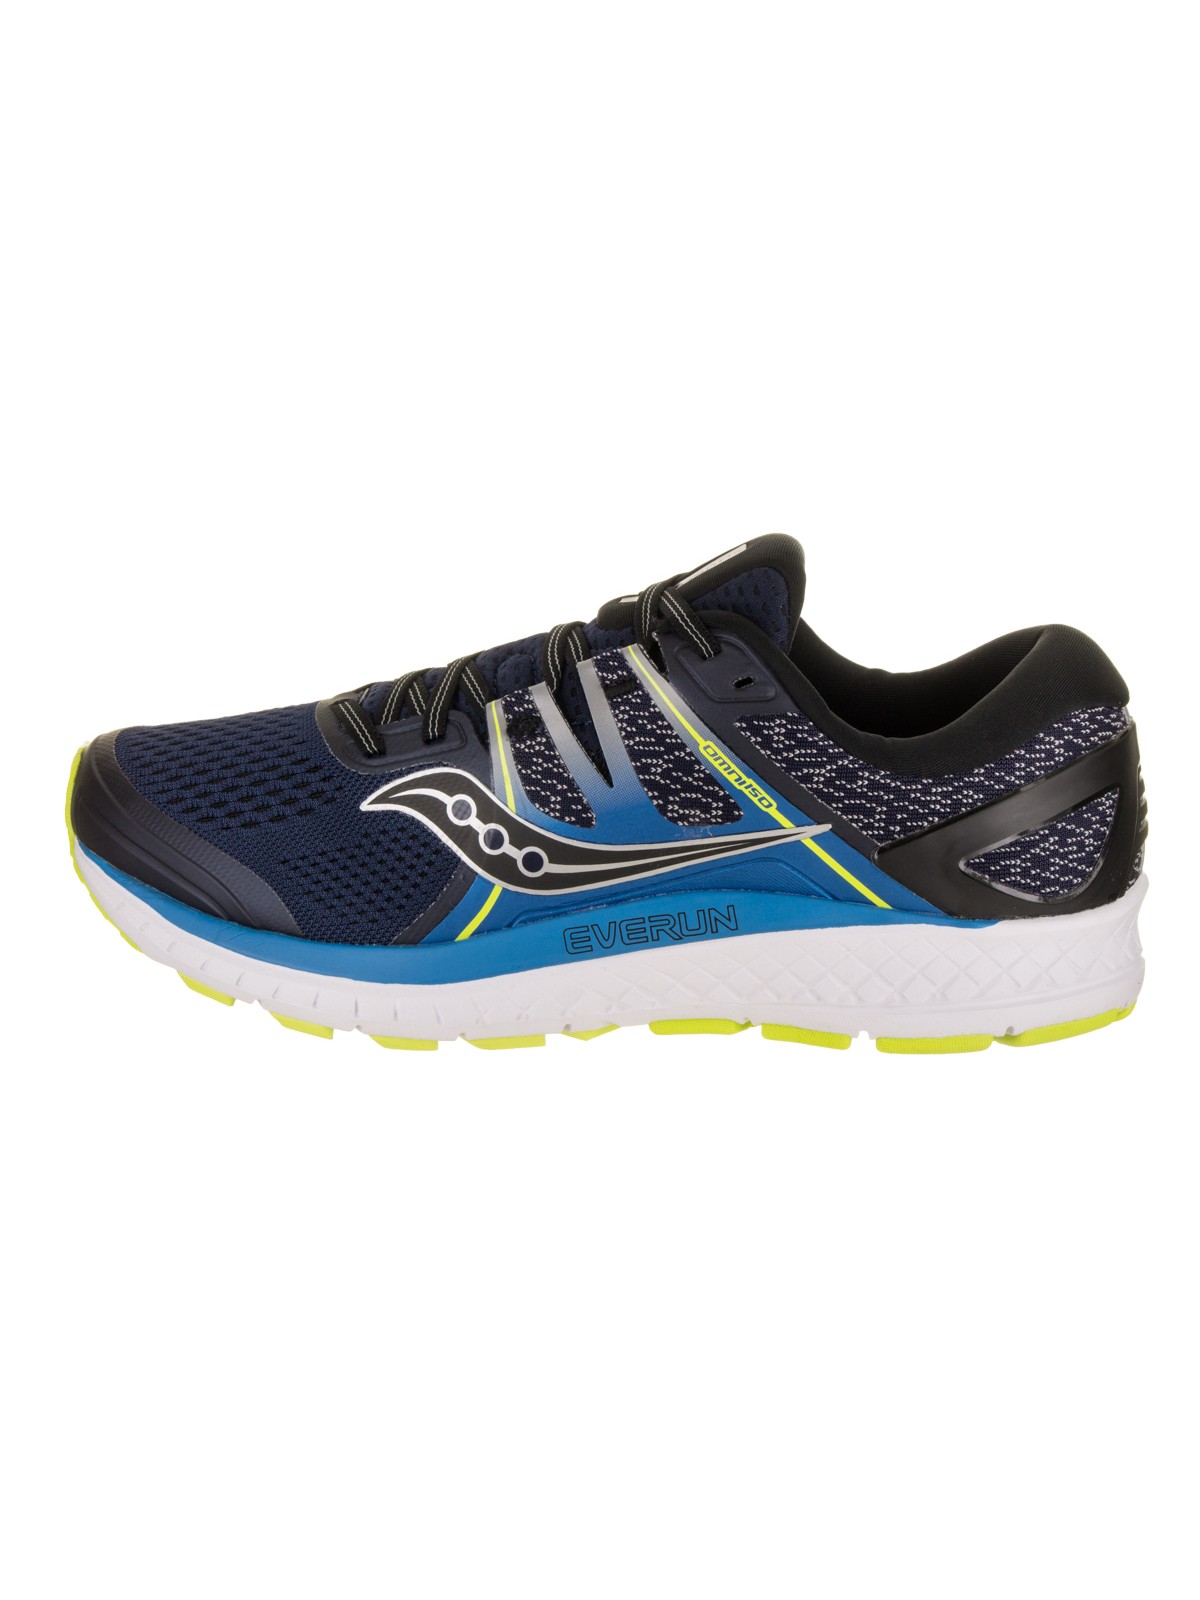 Saucony Mens Omni ISO Road Running Shoe Sneaker - Navy/Blue/Citron - Size 12 - image 3 of 5